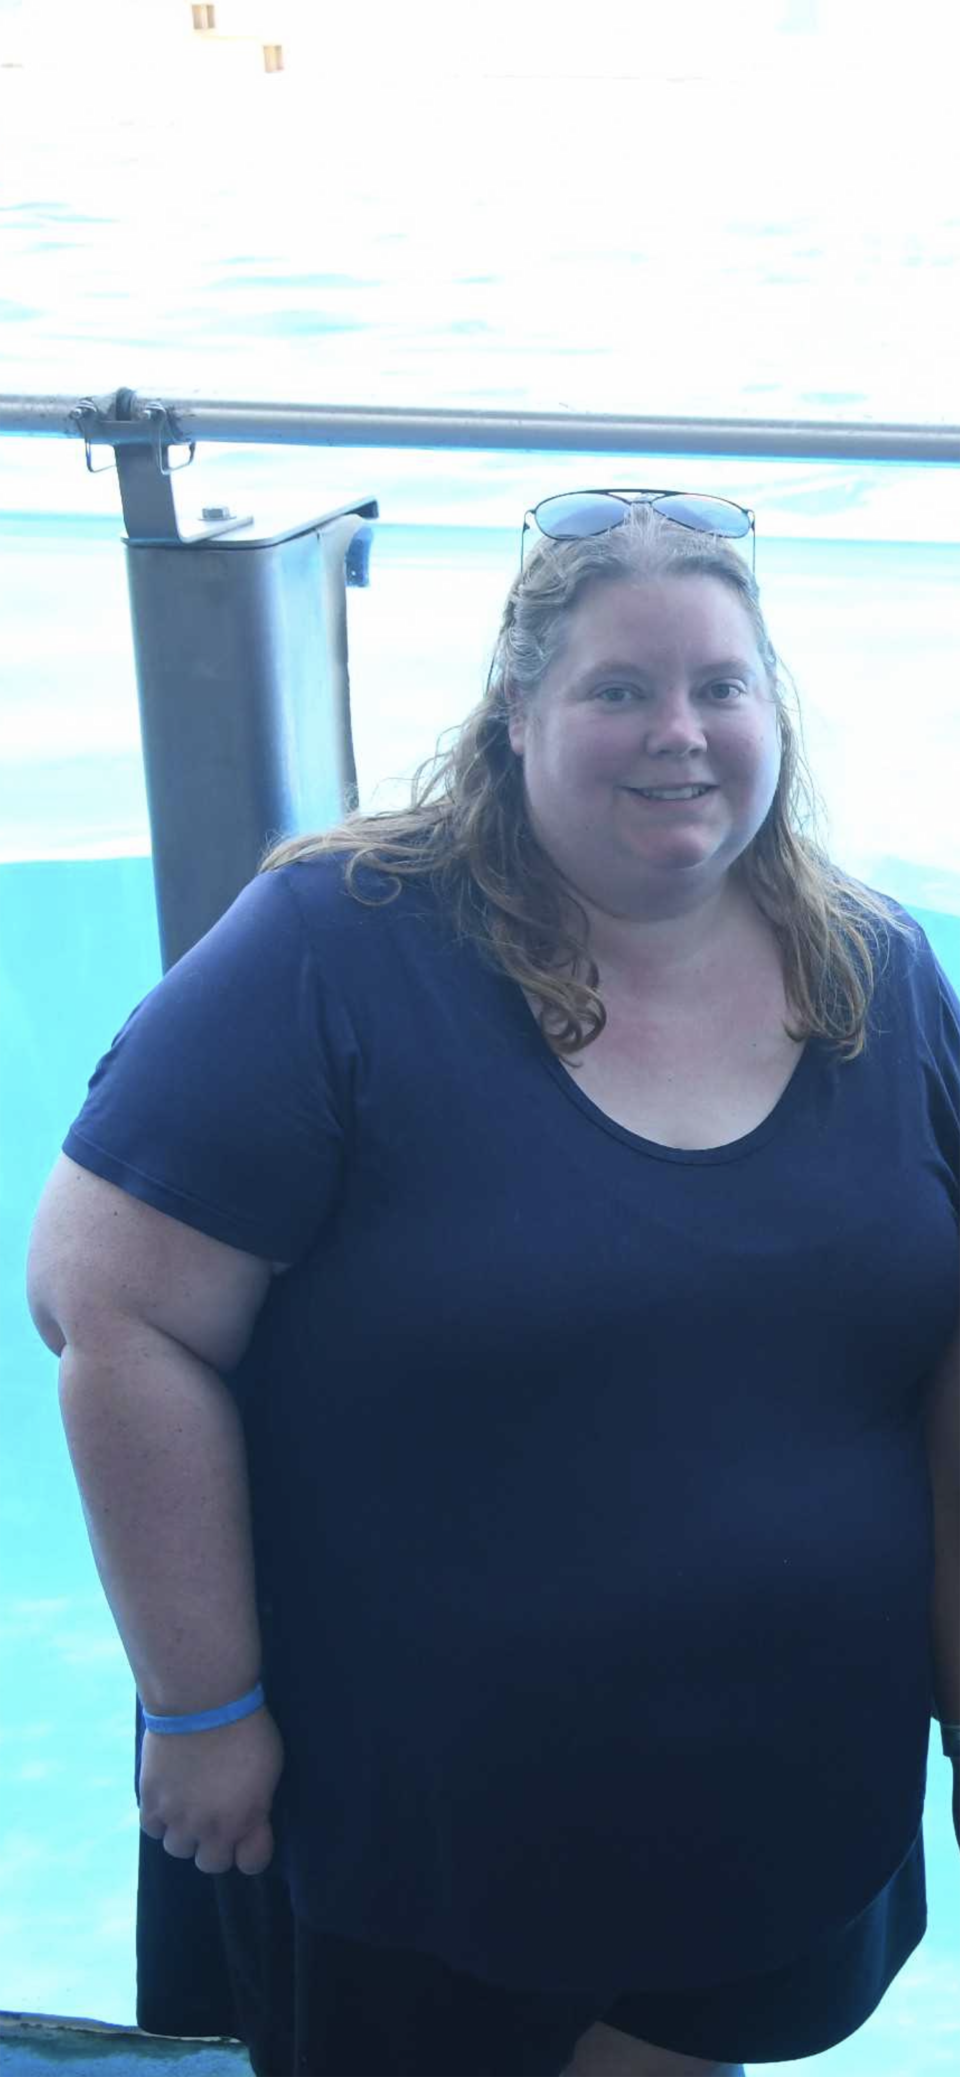 After a diabetes diagnosis scared her, this mom lost 130 pounds and now walks 5 miles every day (Courtesy Kristi Ledgerwood)